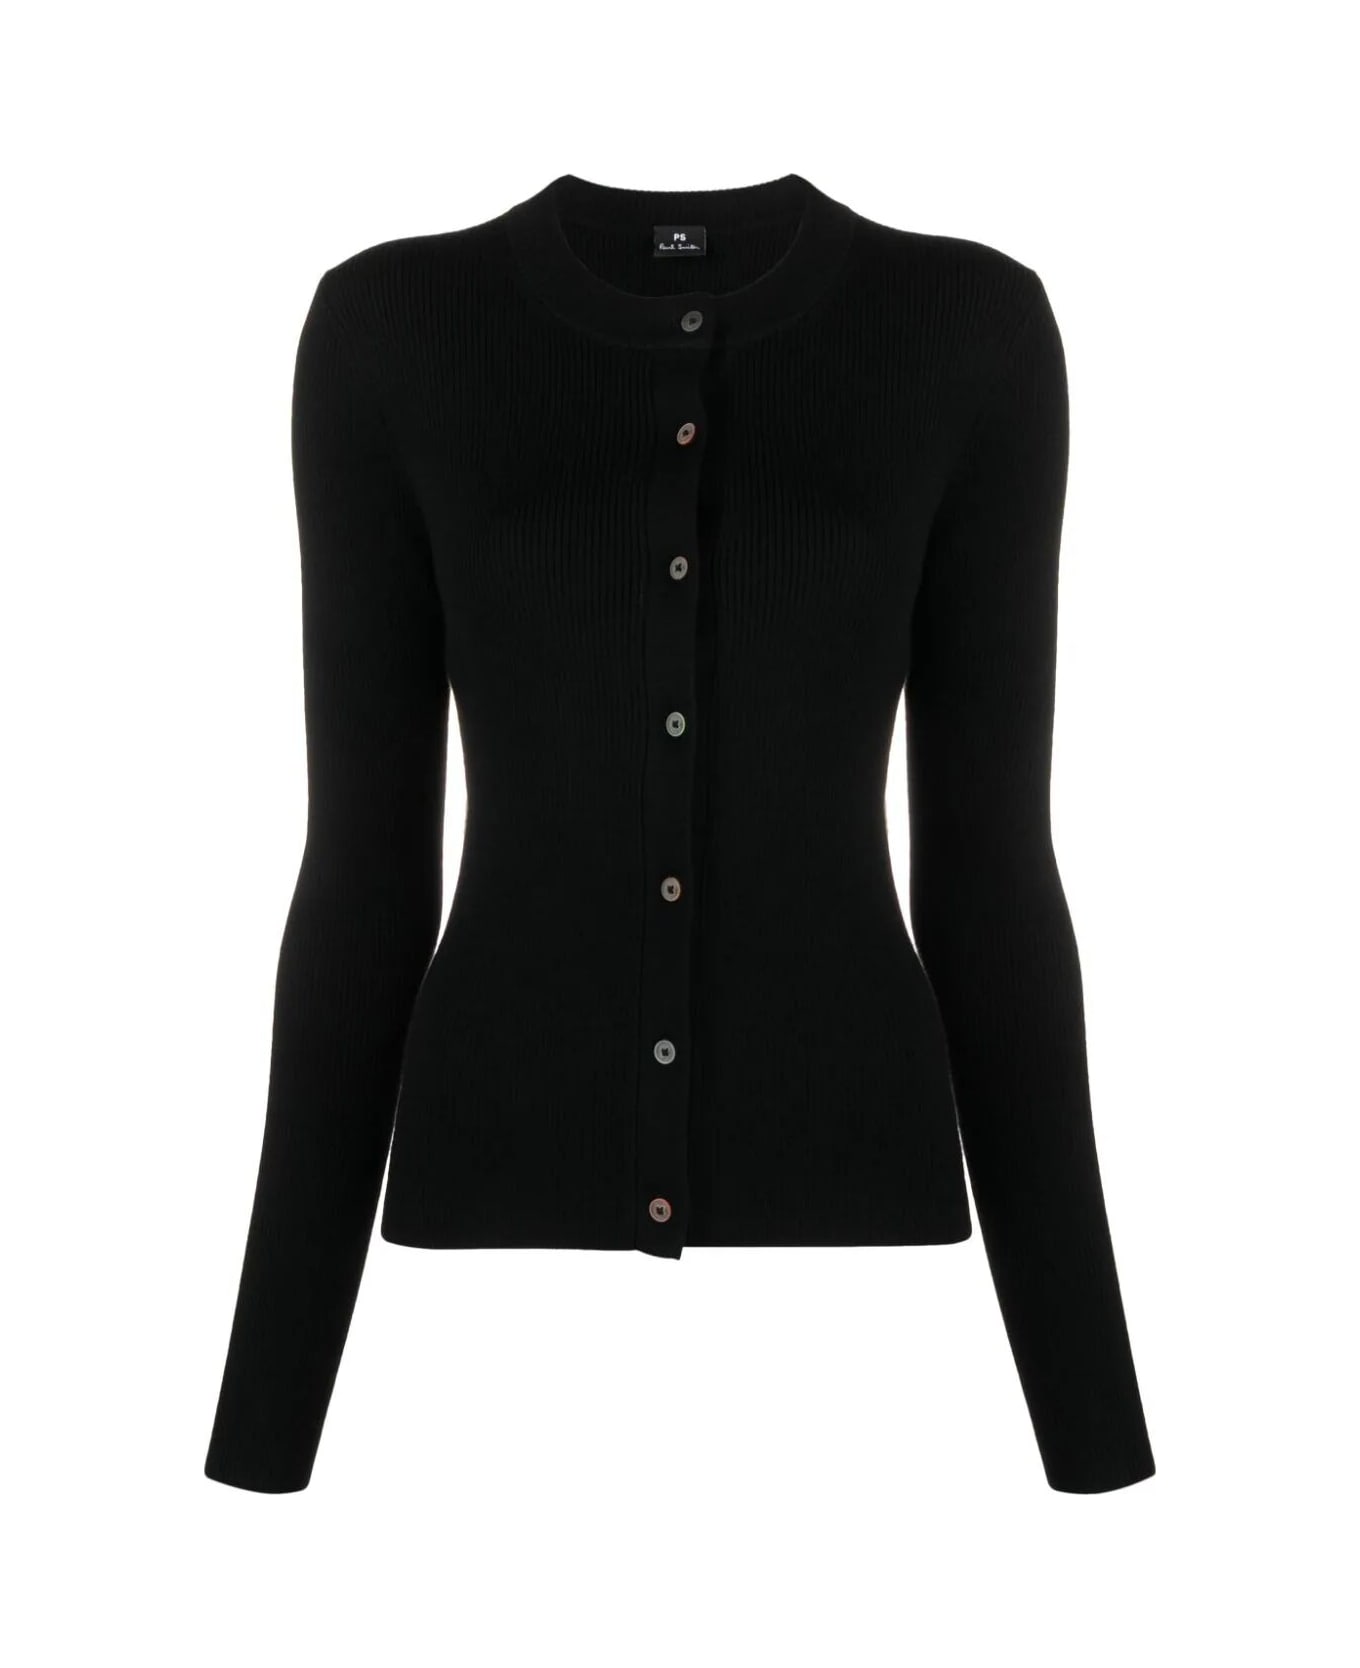 PS by Paul Smith Knitted Buttoned Cardigan - Black